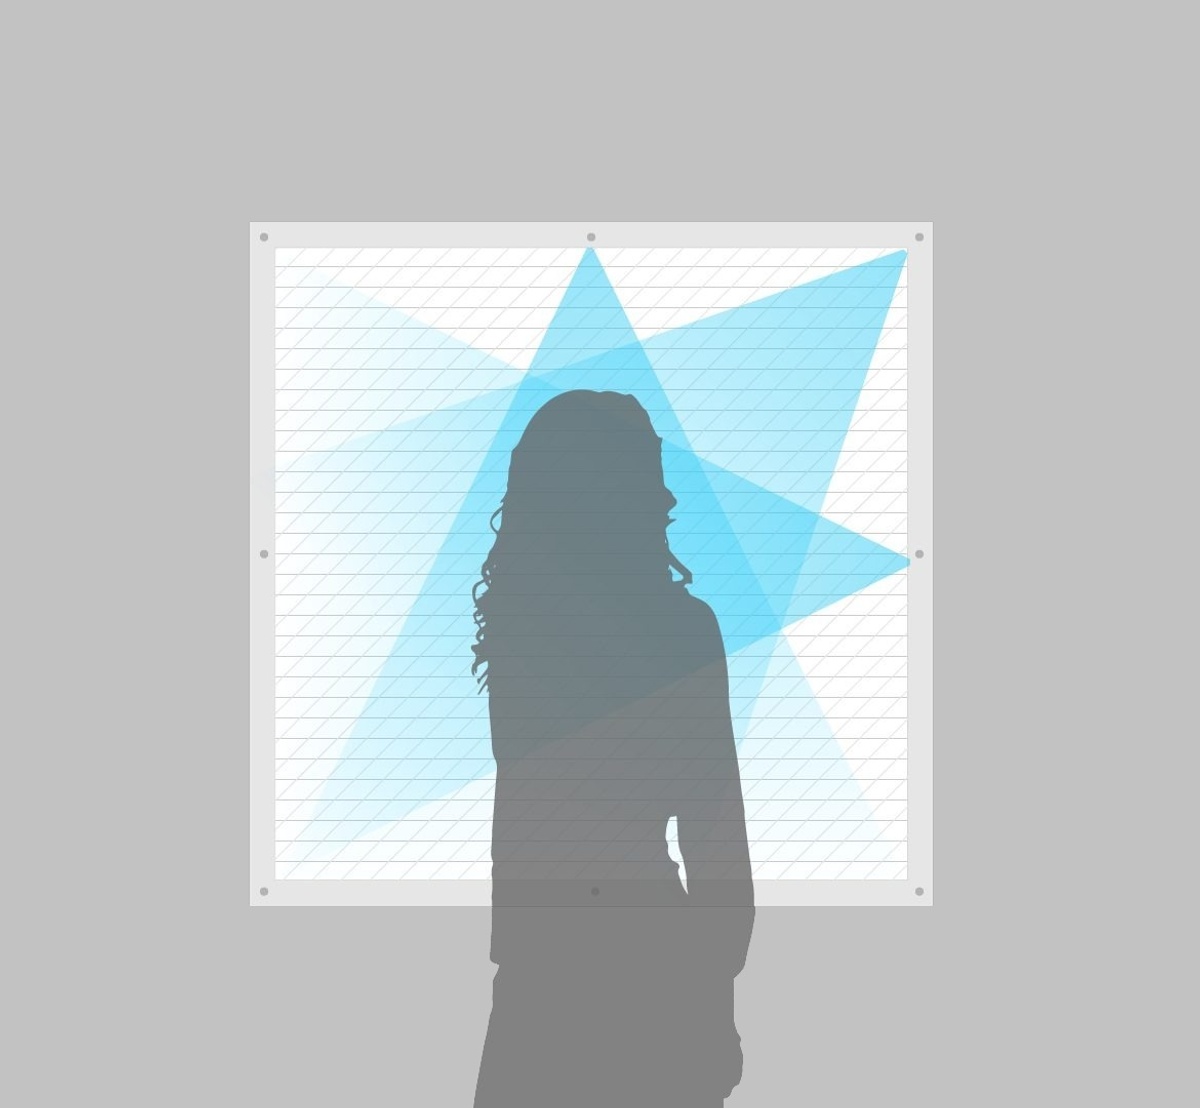 Illustration of a person looking at several intersecting rays of light in a square